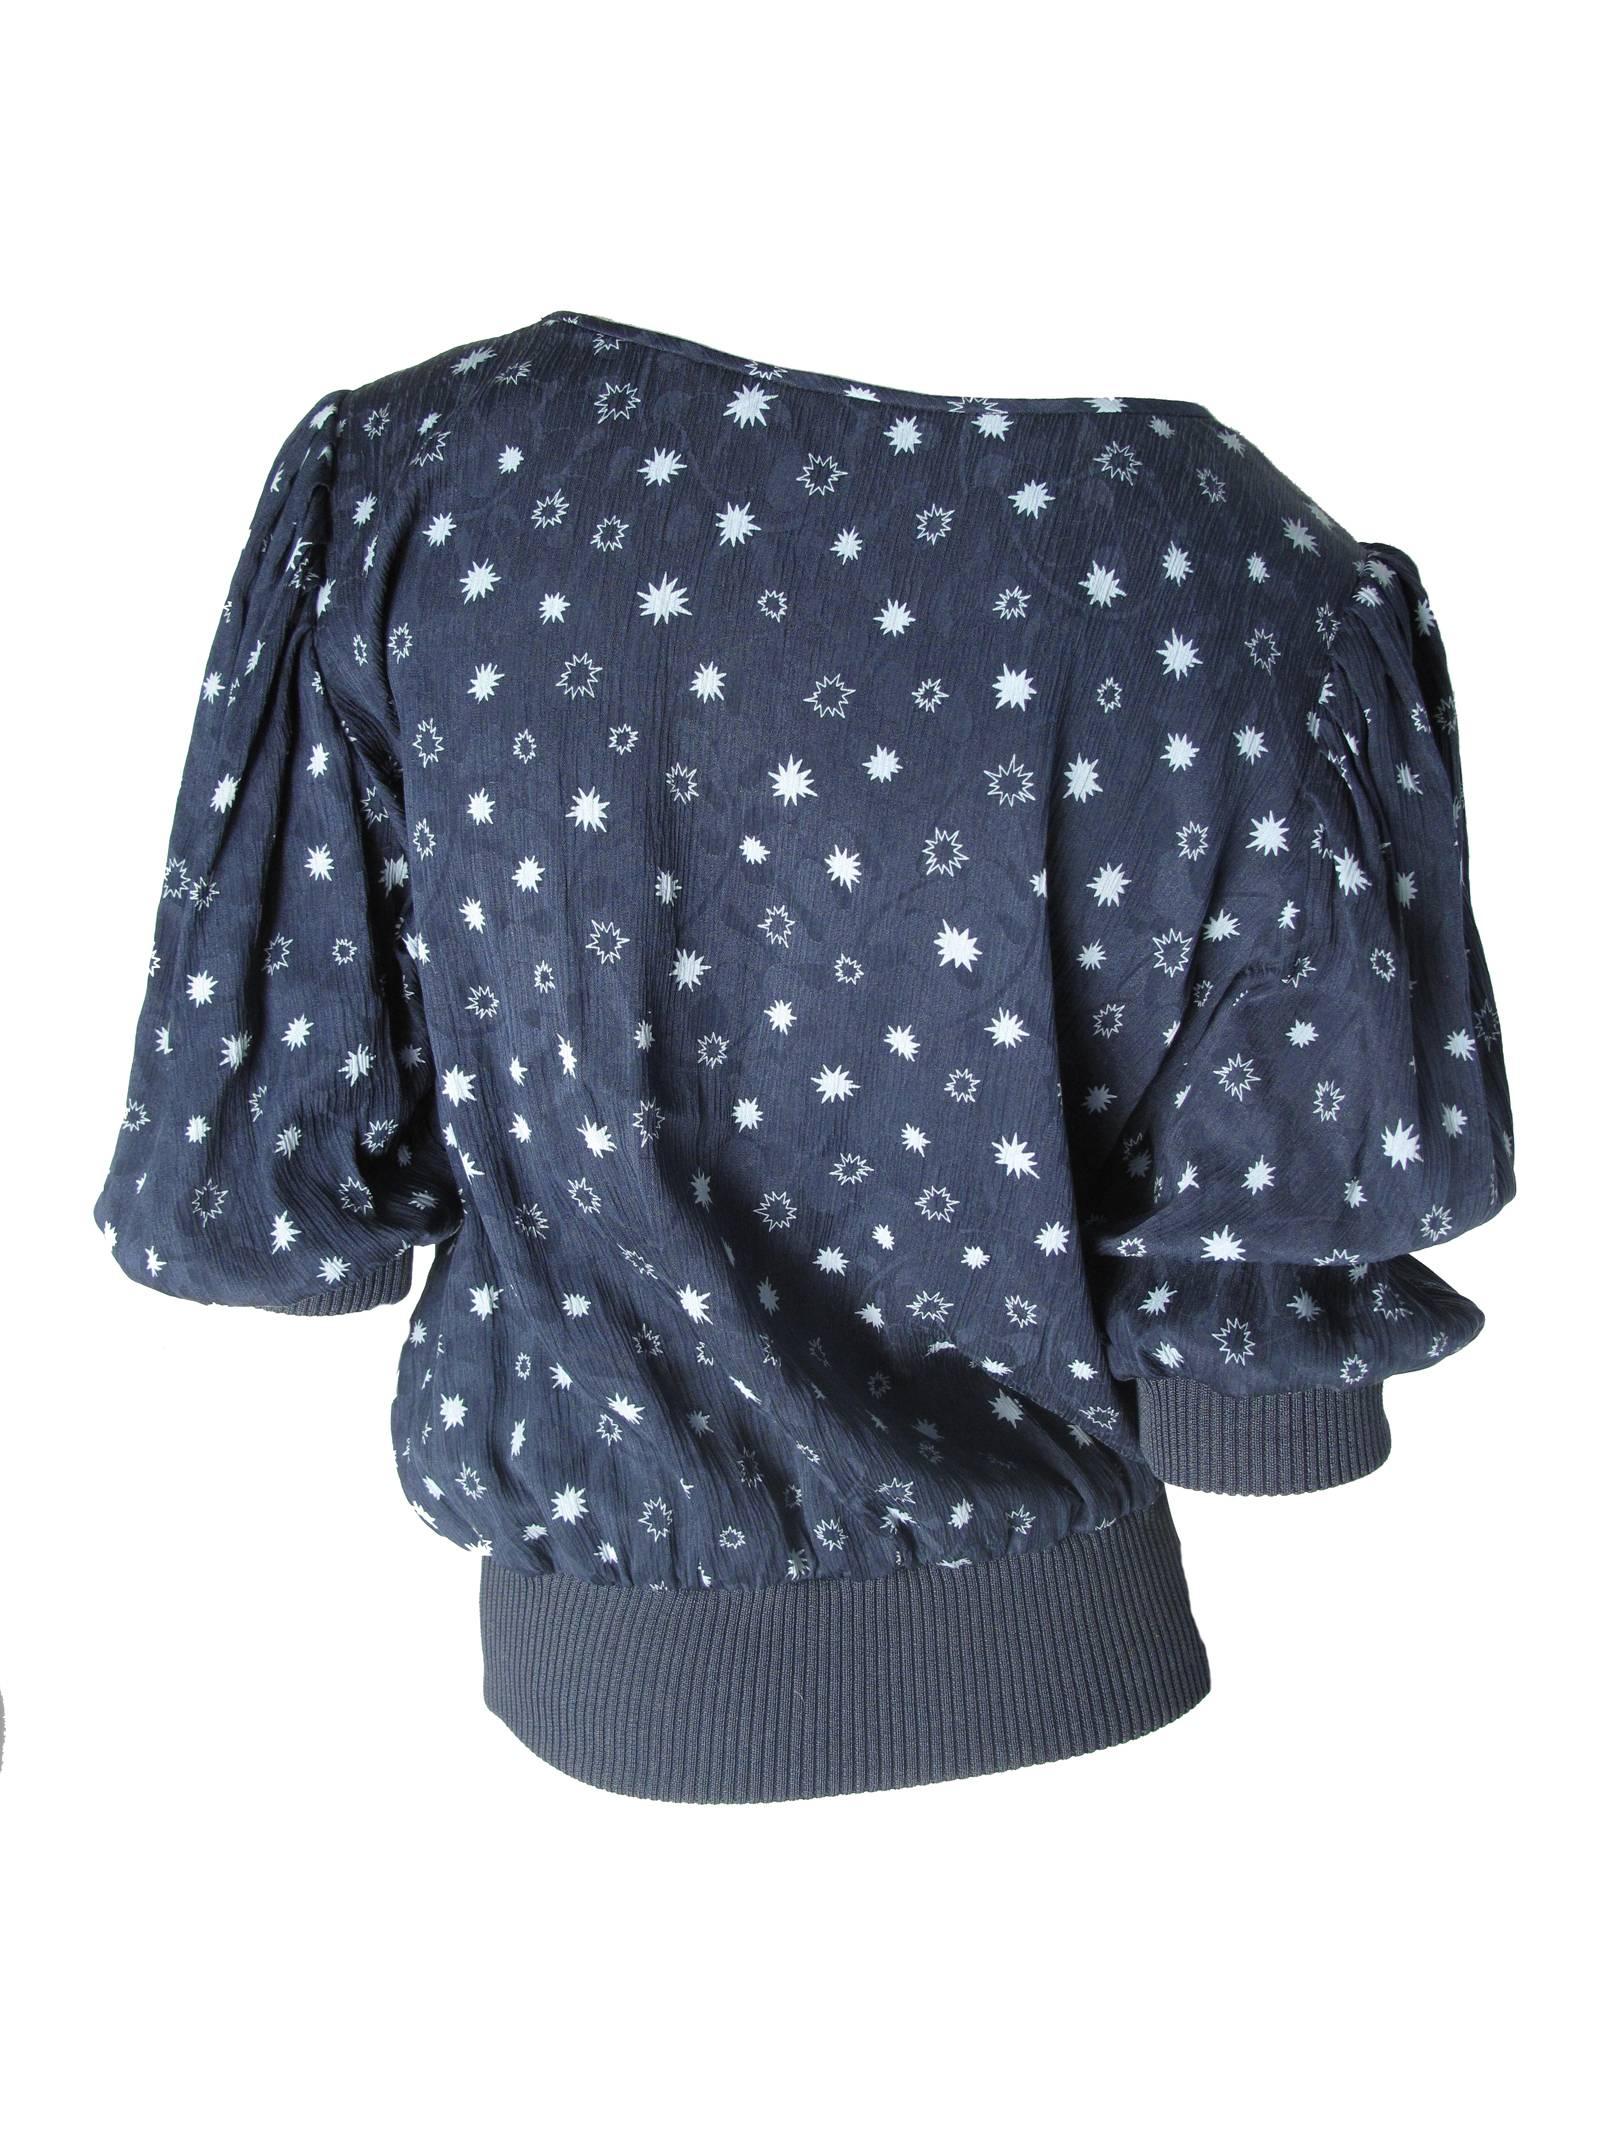 Ungaro silk crepe navy top with star print and elastic waist and cuffs.   Condition: Excellent. Size L

41